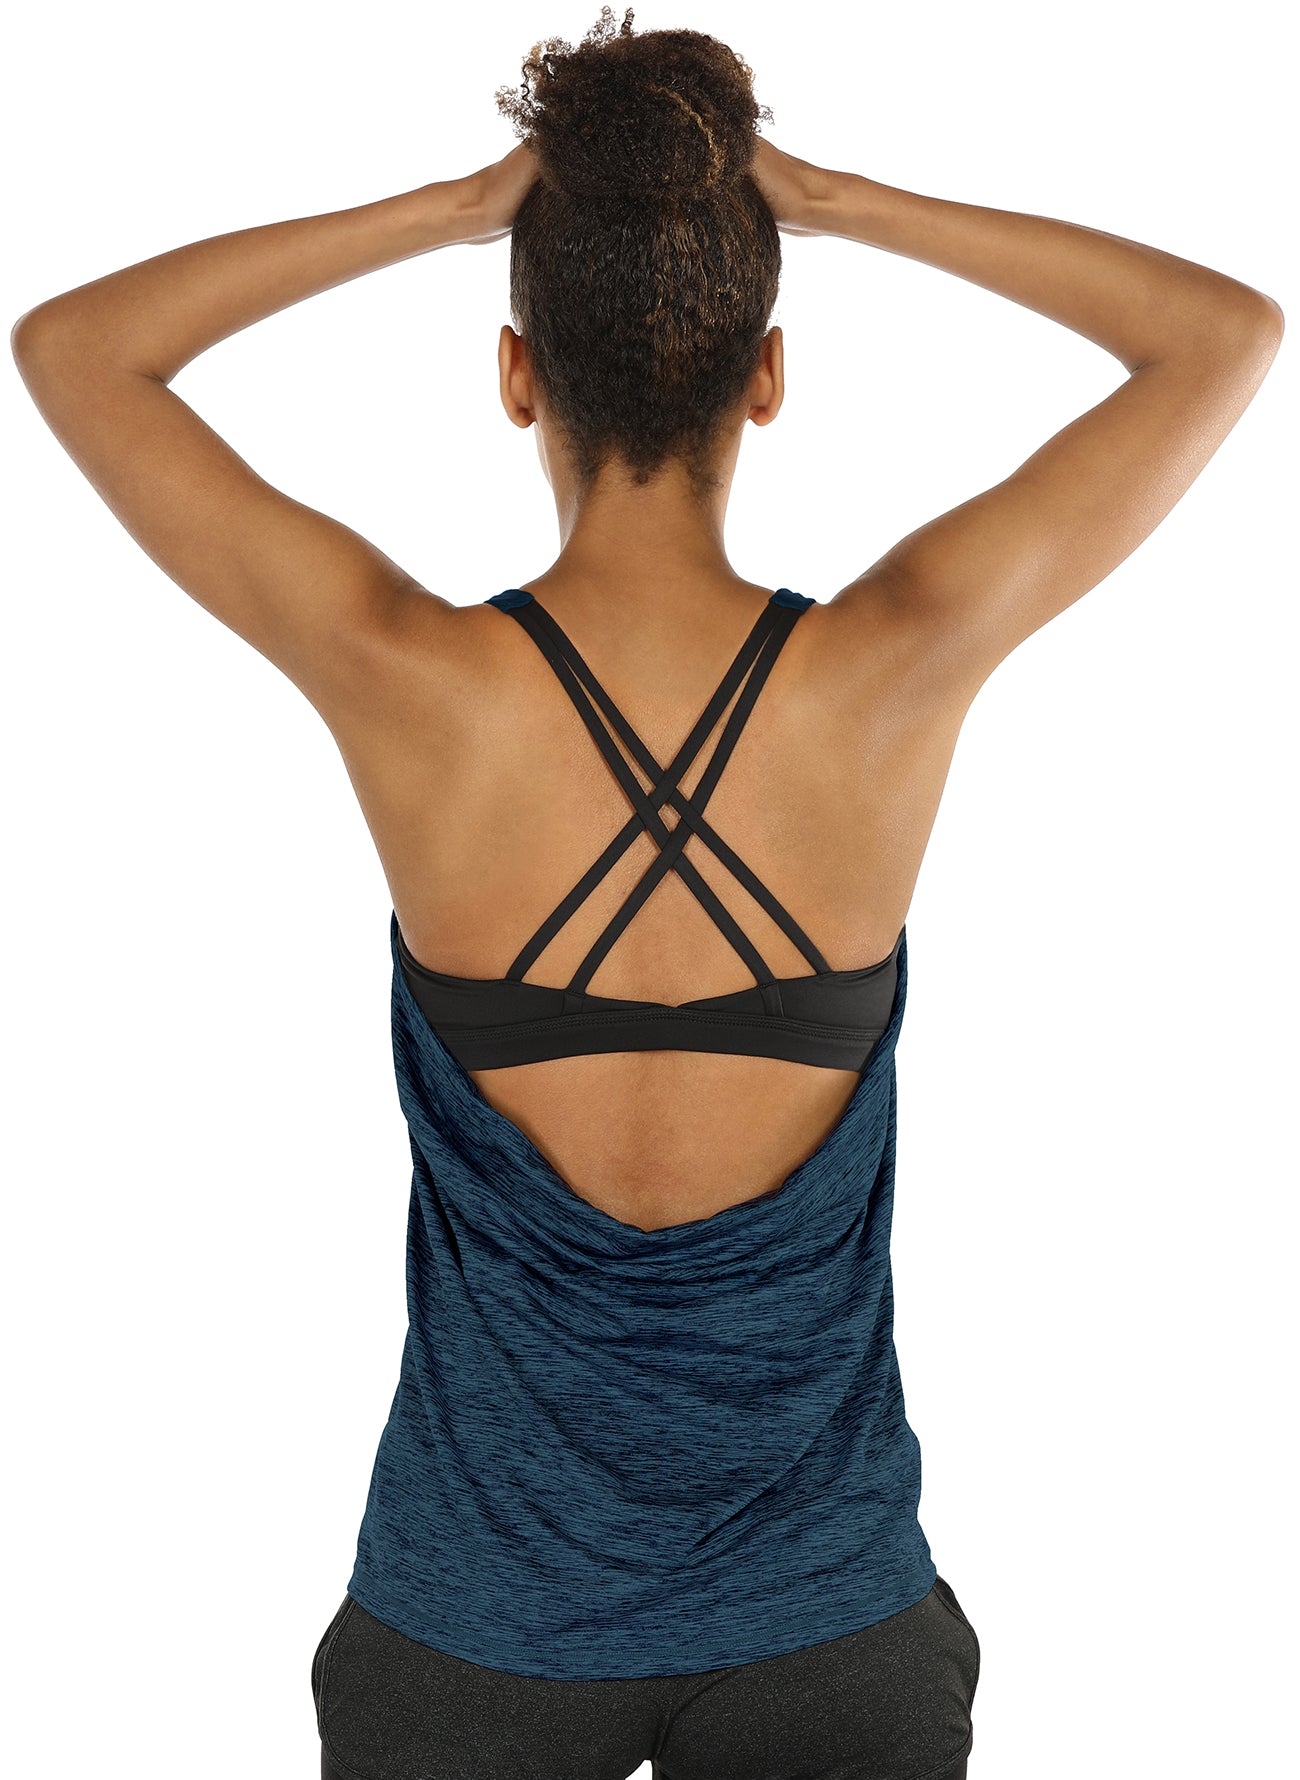  Icyzone Yoga Tops Workouts Clothes Activewear Built